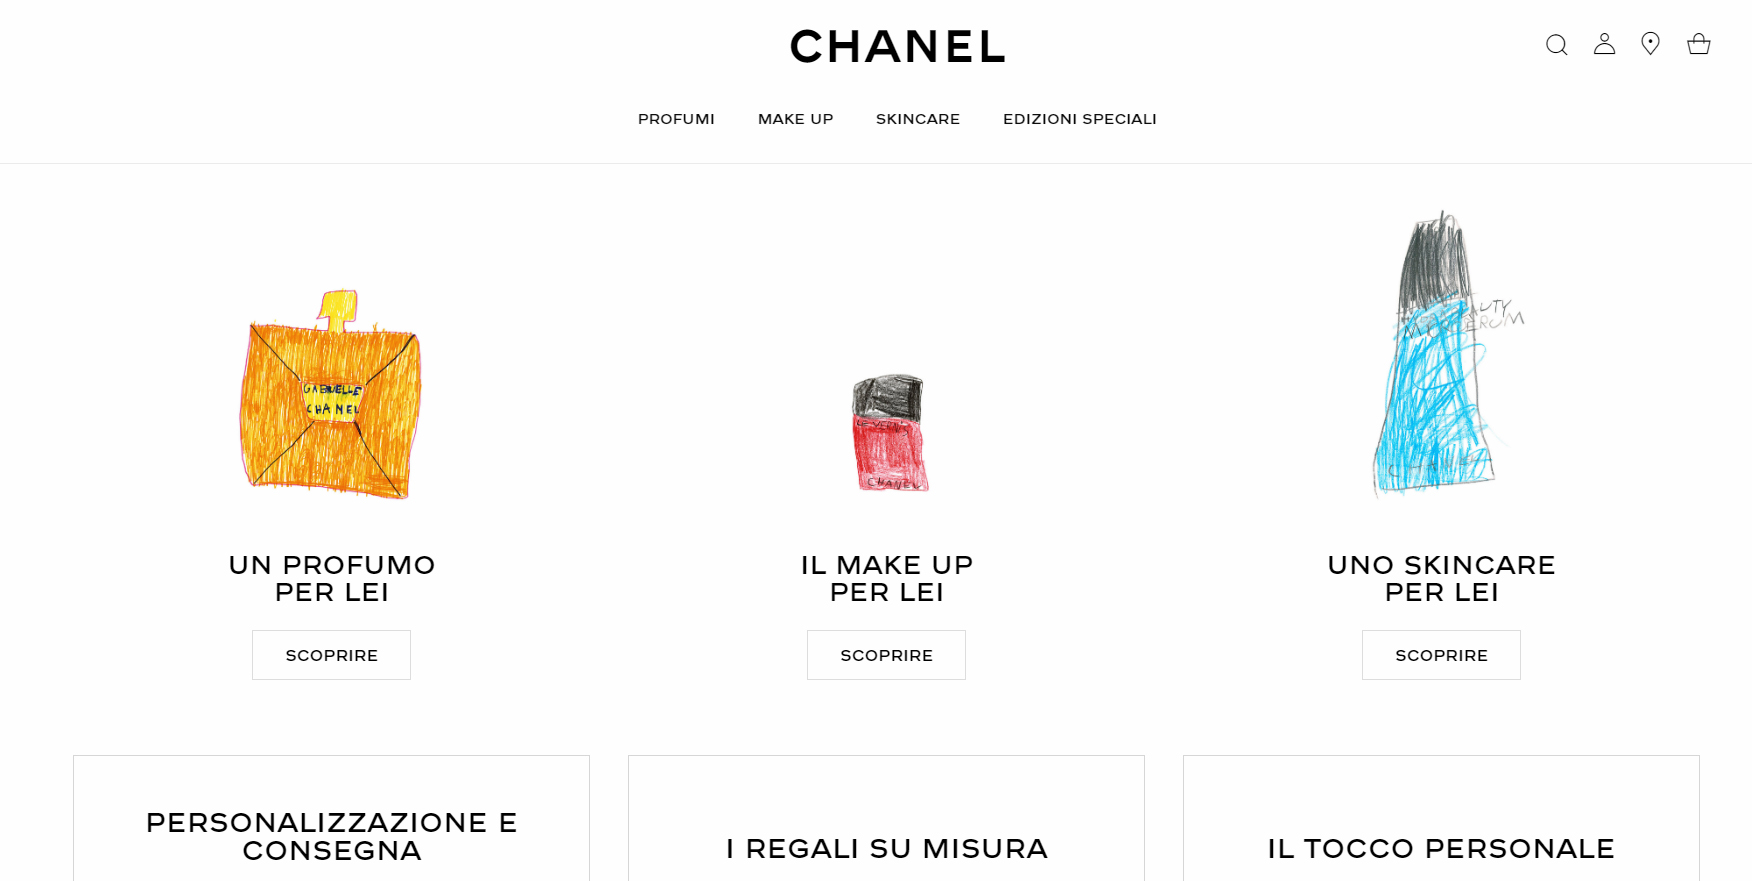 Chanel Happy Mother's Day by little artists - ZOE Magazine